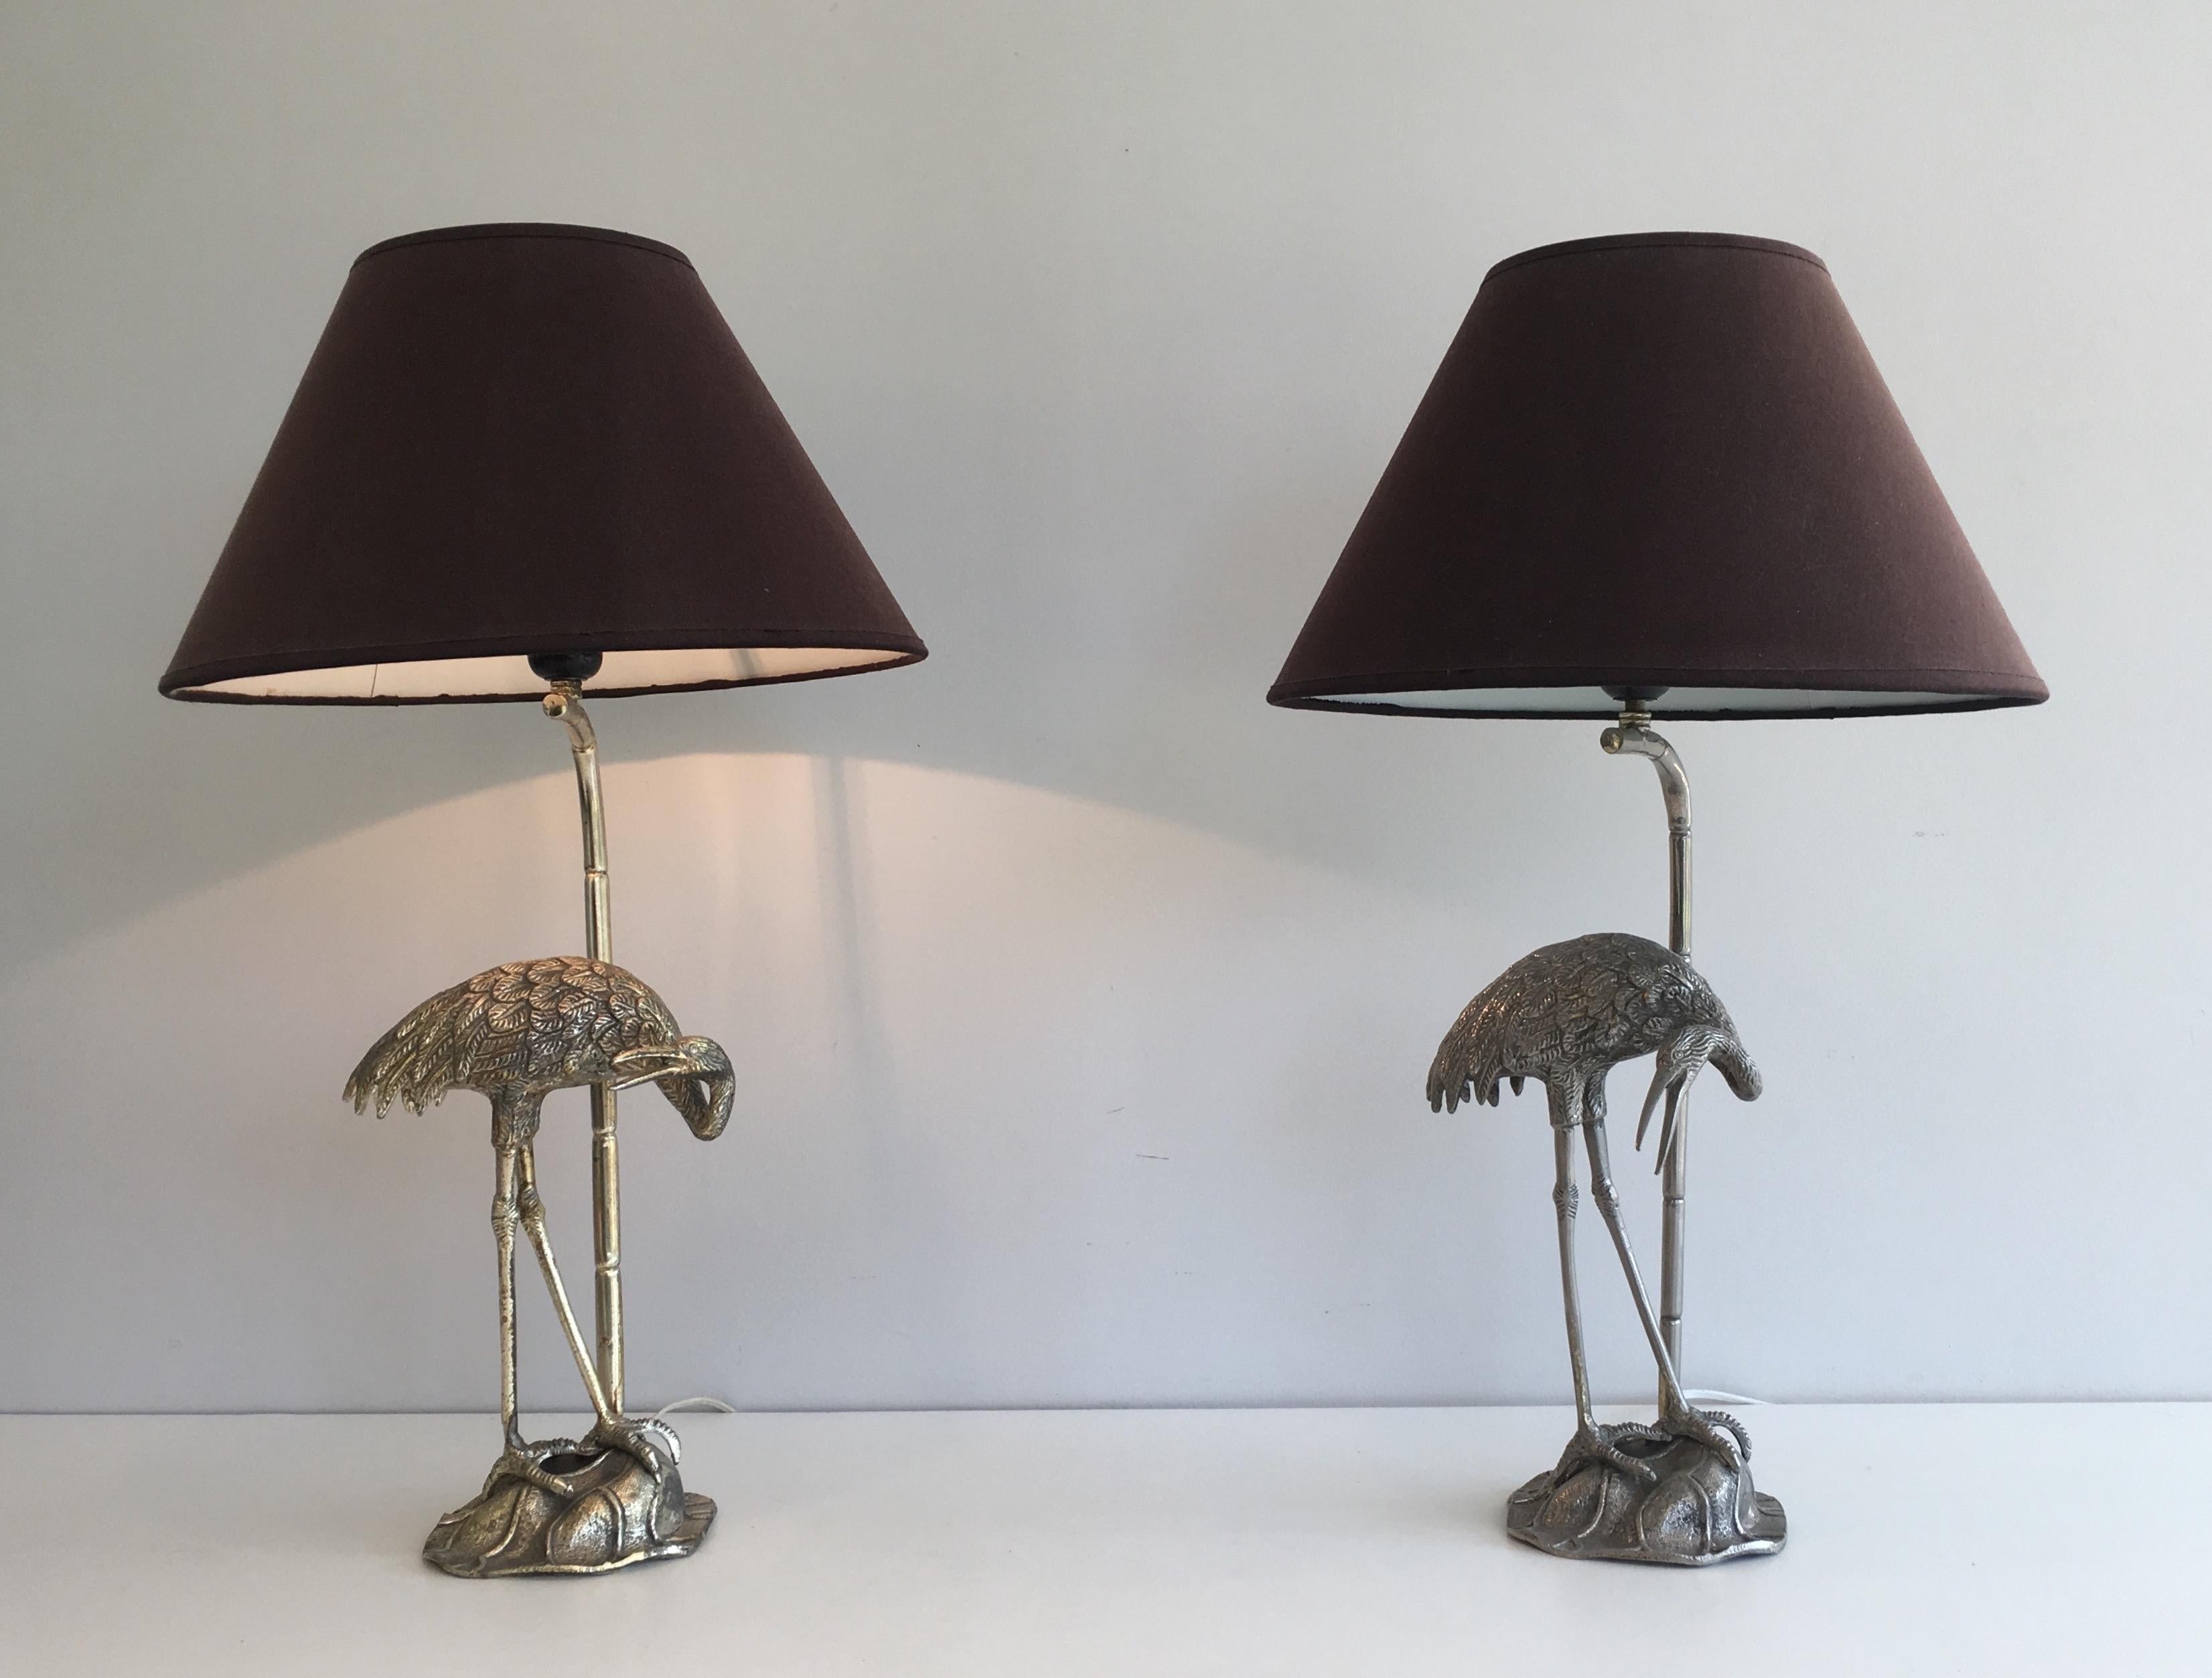 Mid-20th Century Pair of Silvered Herons Table Lamps. French work by Maison Bagués. Circa 1940